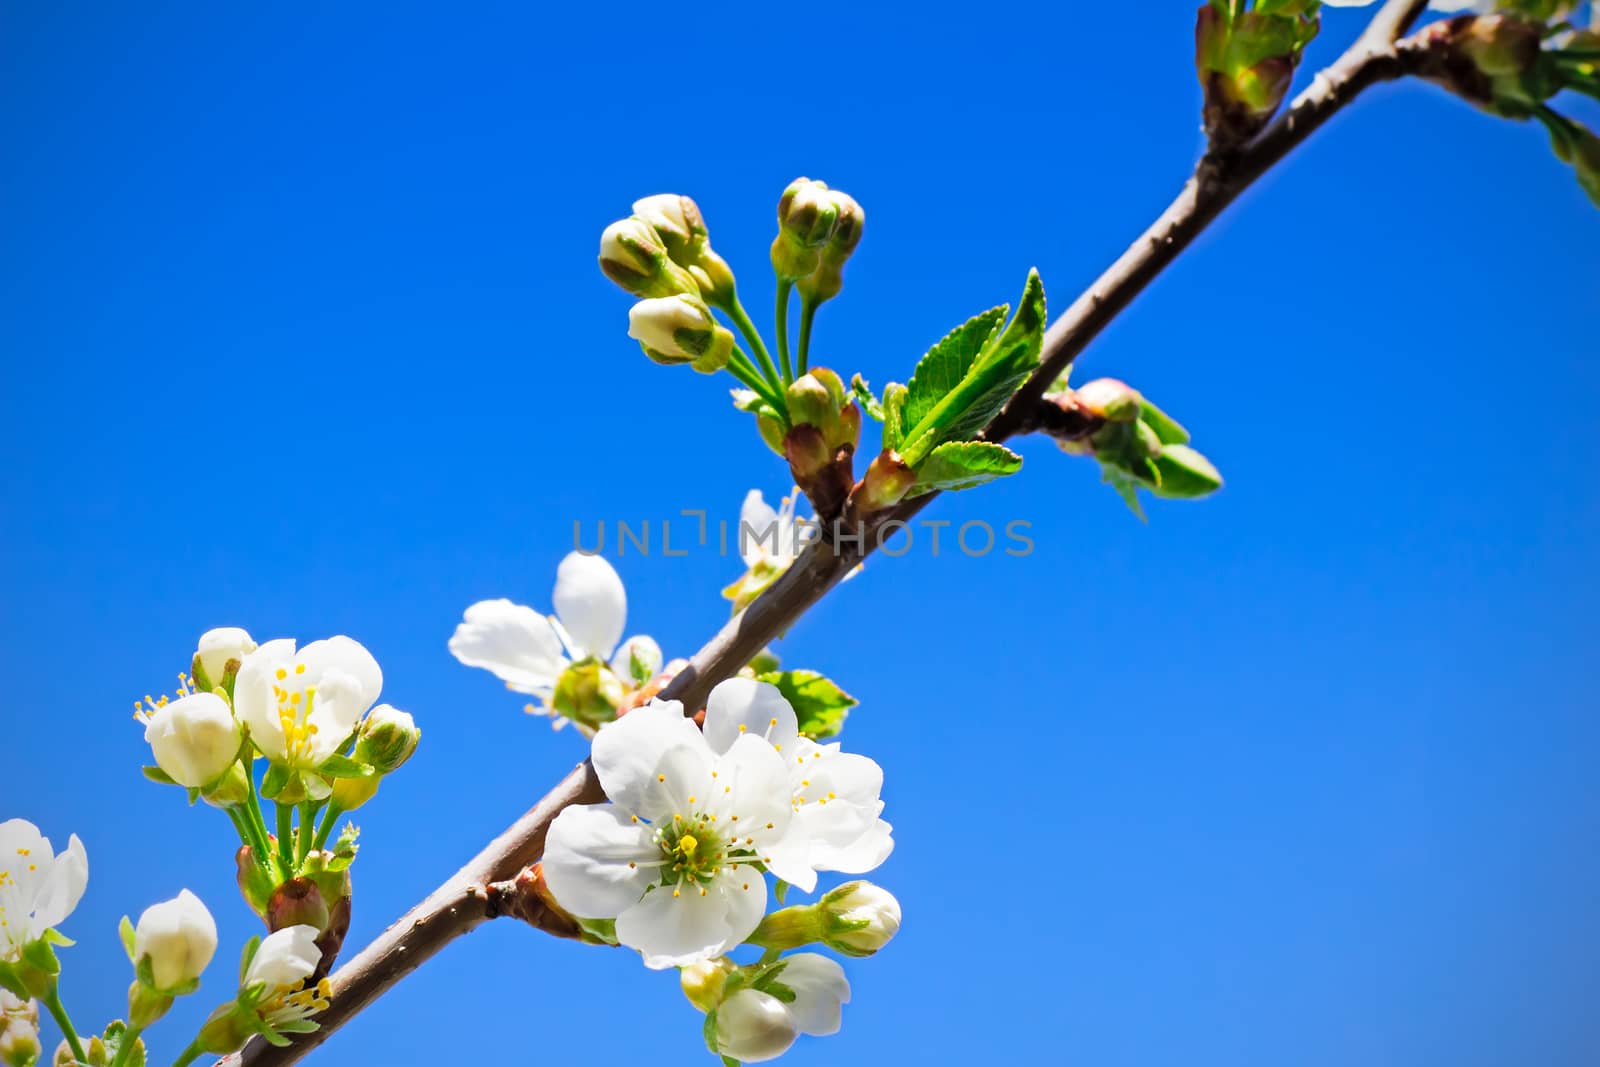 Cherry branch with a large number of white flowers against the blue sky.